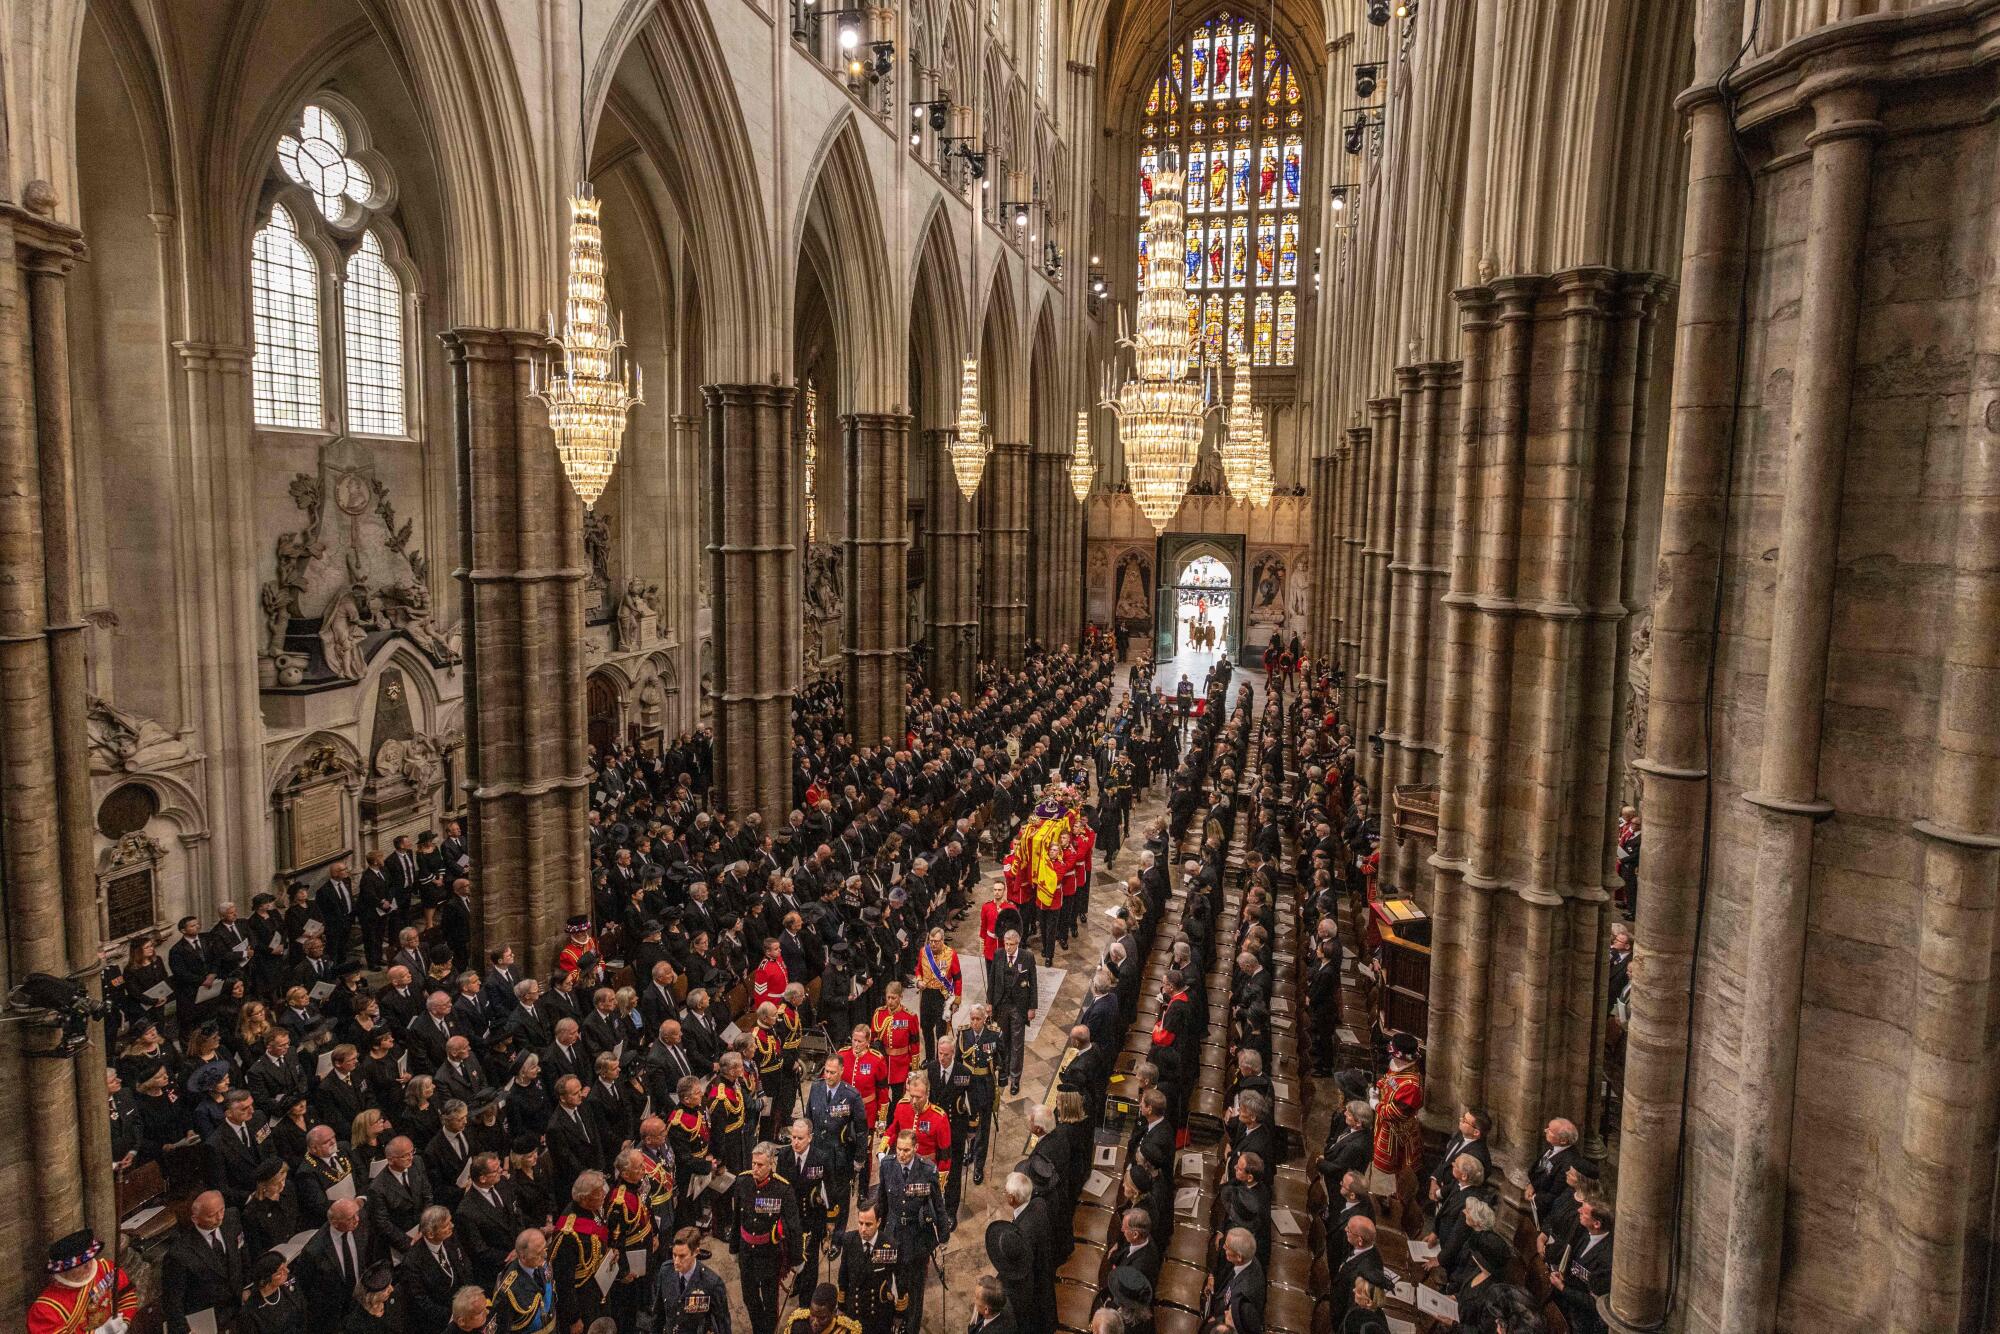 The State Funeral Service for Britain's Queen Elizabeth II at Westminster Abbey in London.